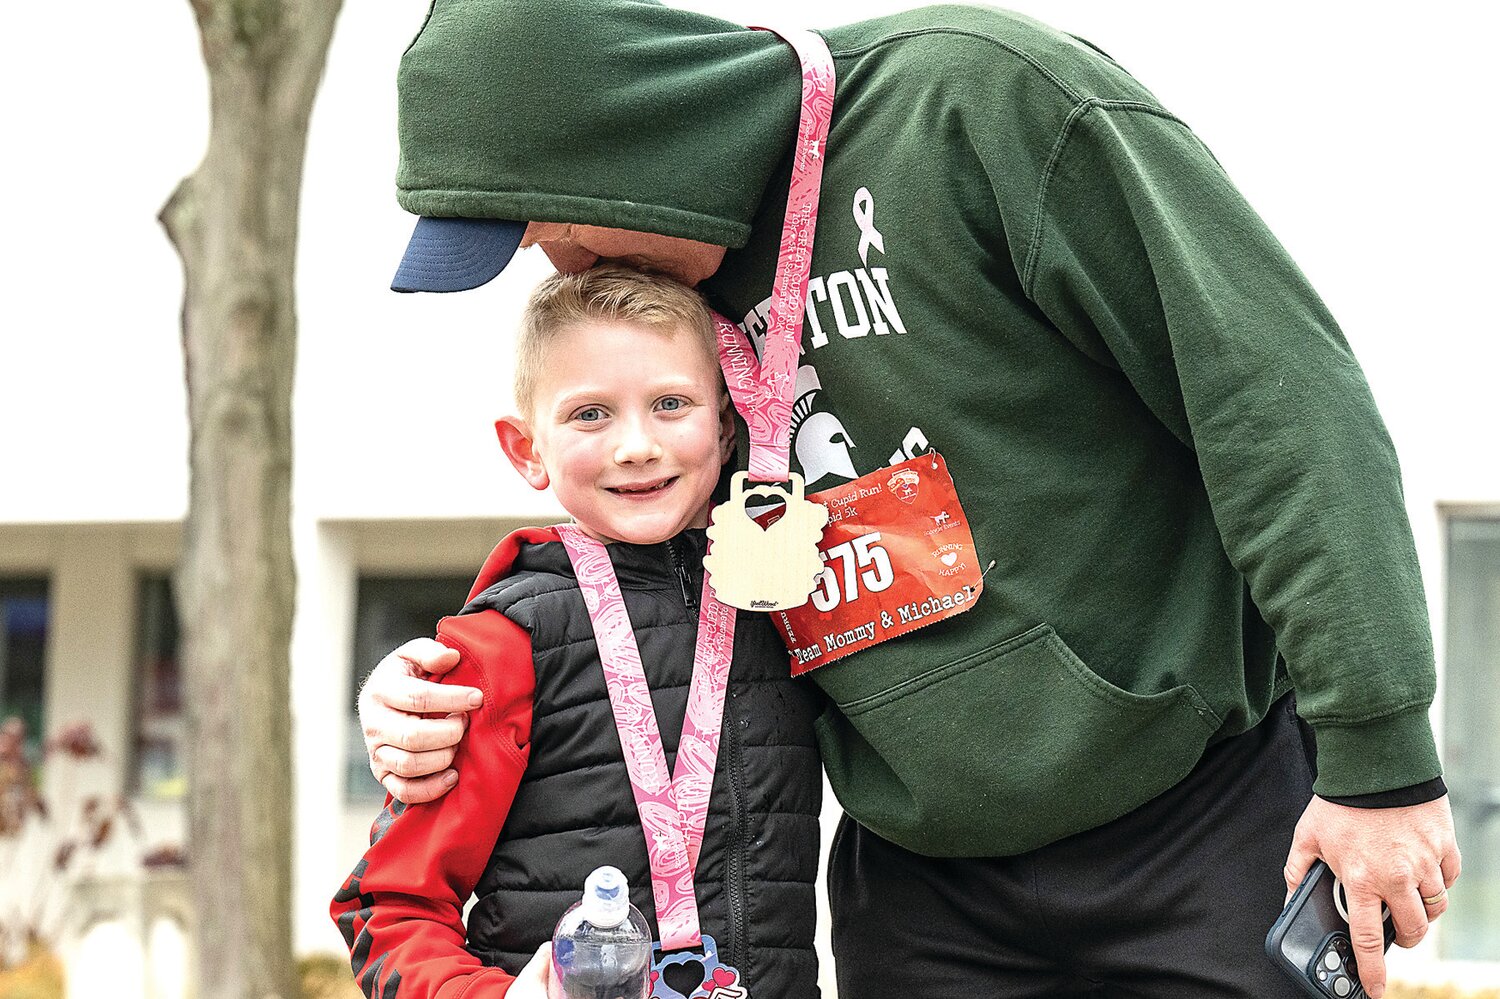 Chris Bullick, of Warminster, rewards his son, Michael Bullick, with a kiss following the completion of the Great Cupid Run.